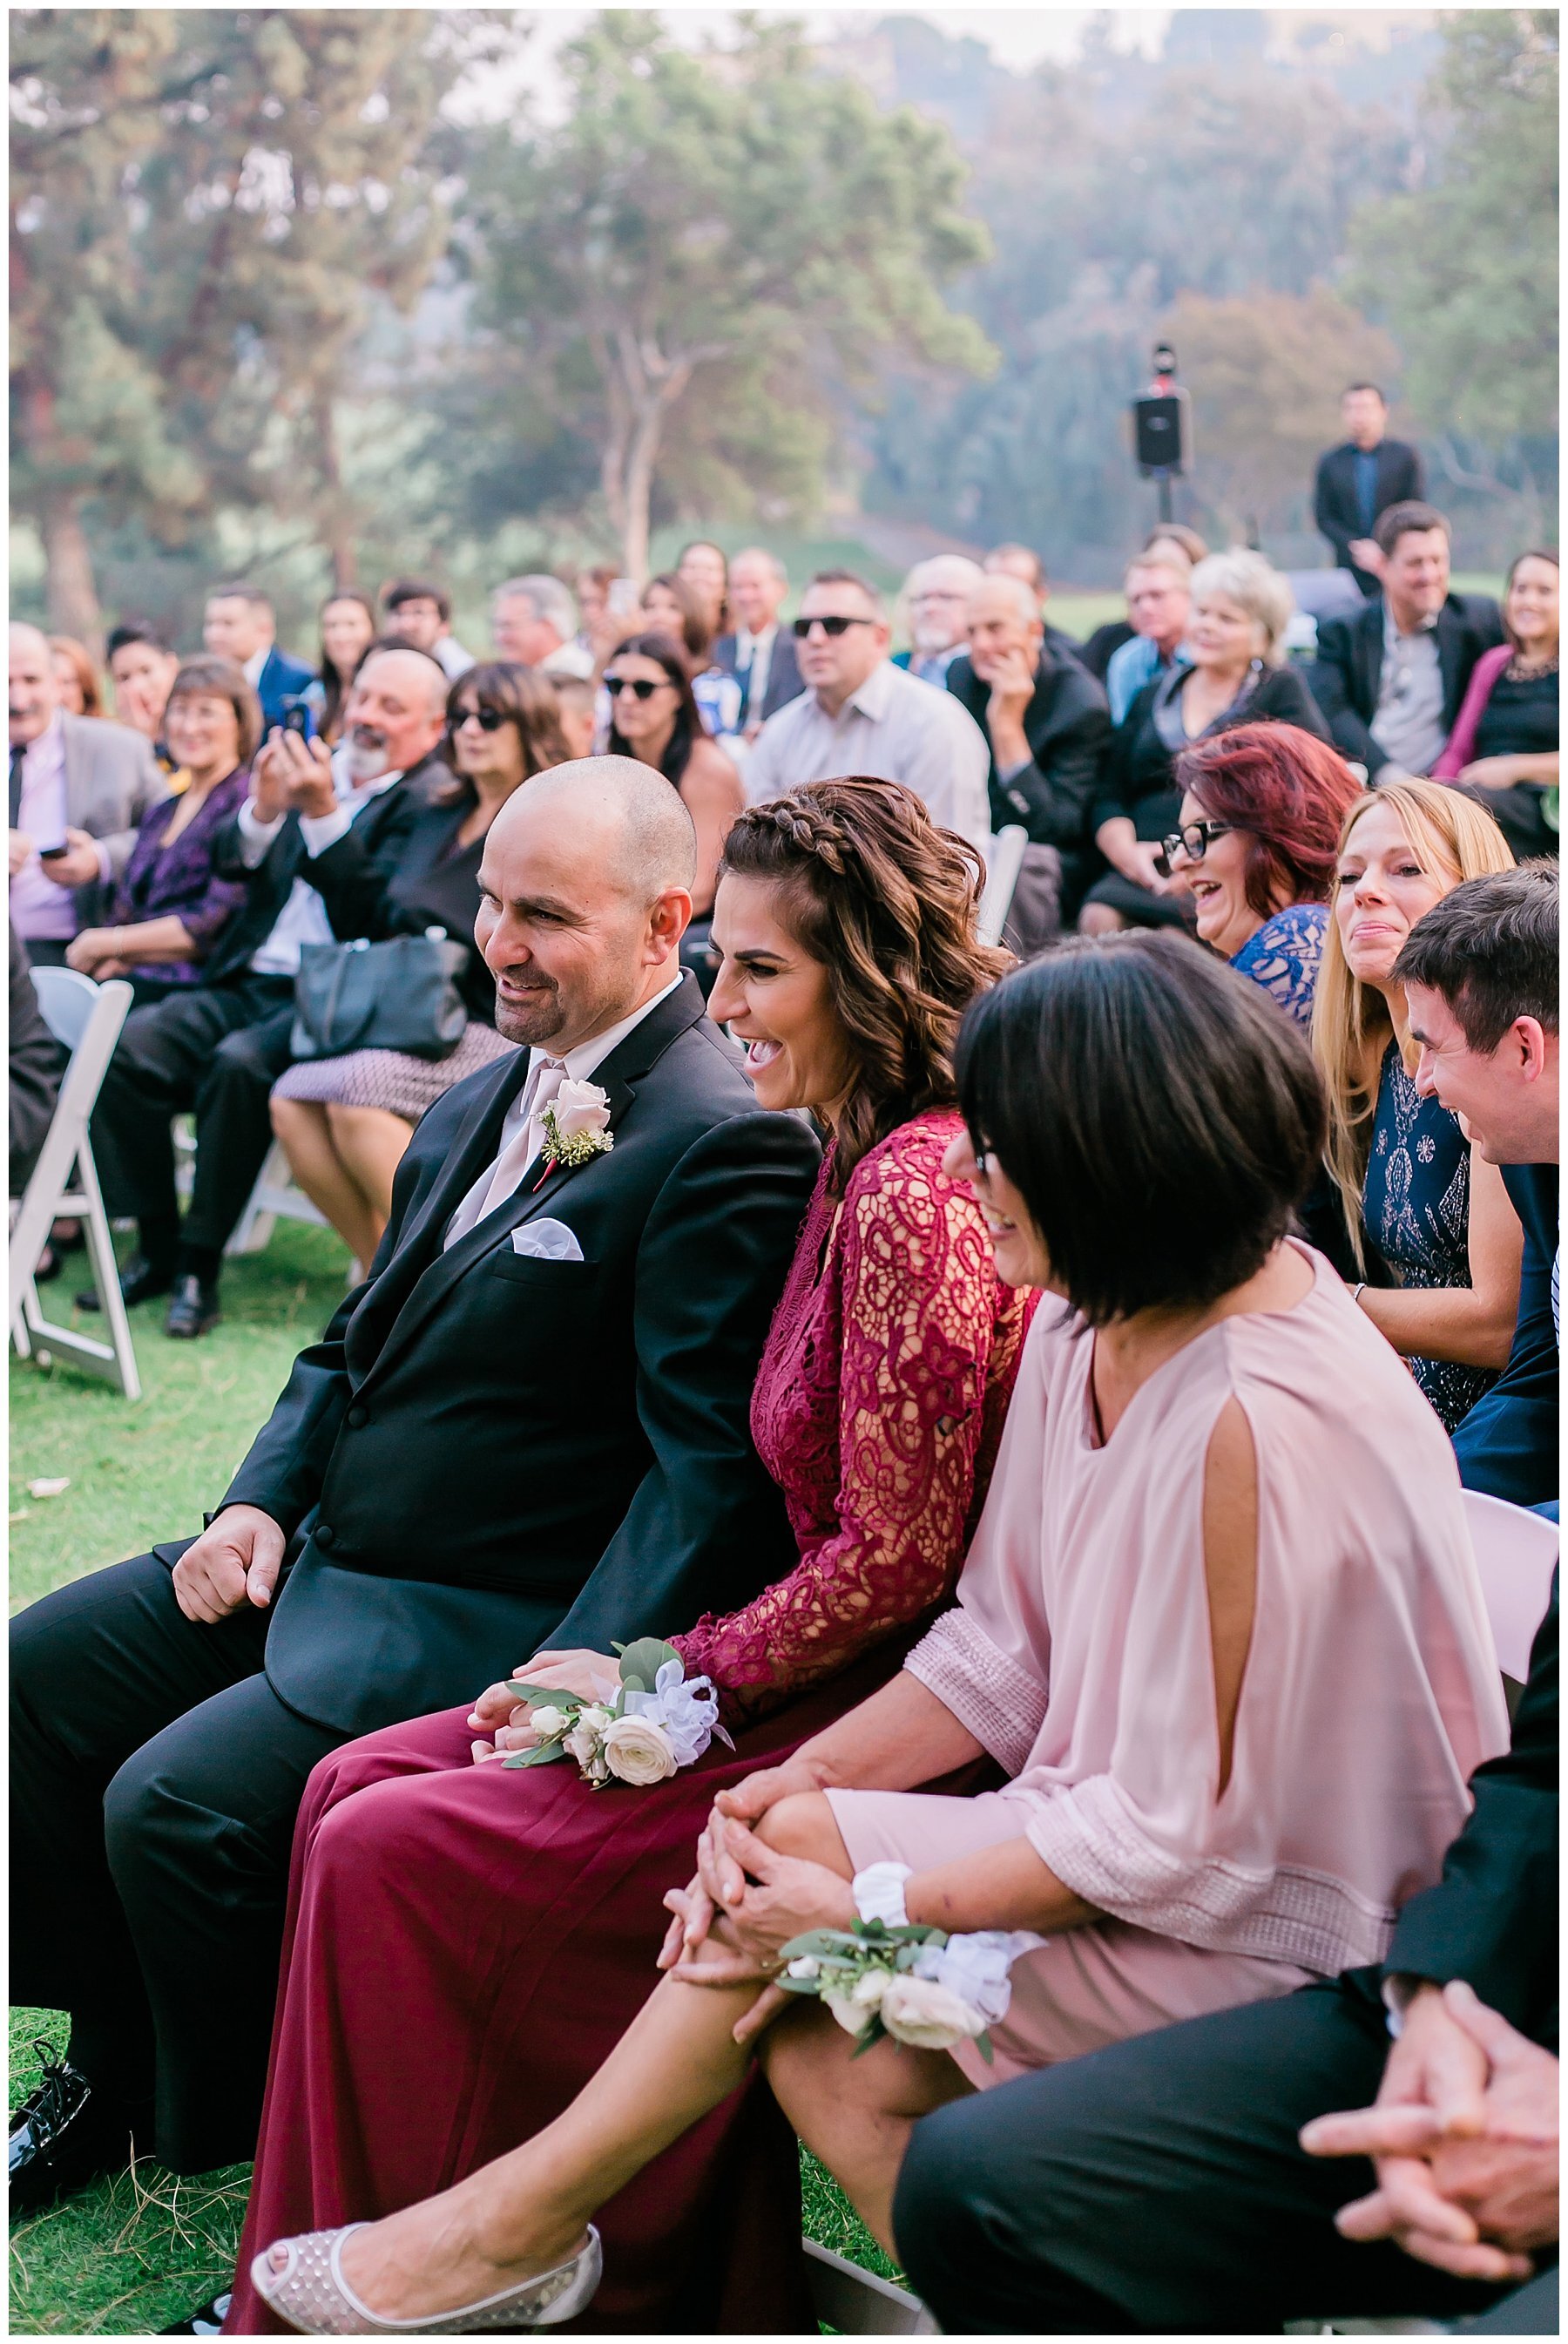  guests watching the bride and groom during the ceremony 